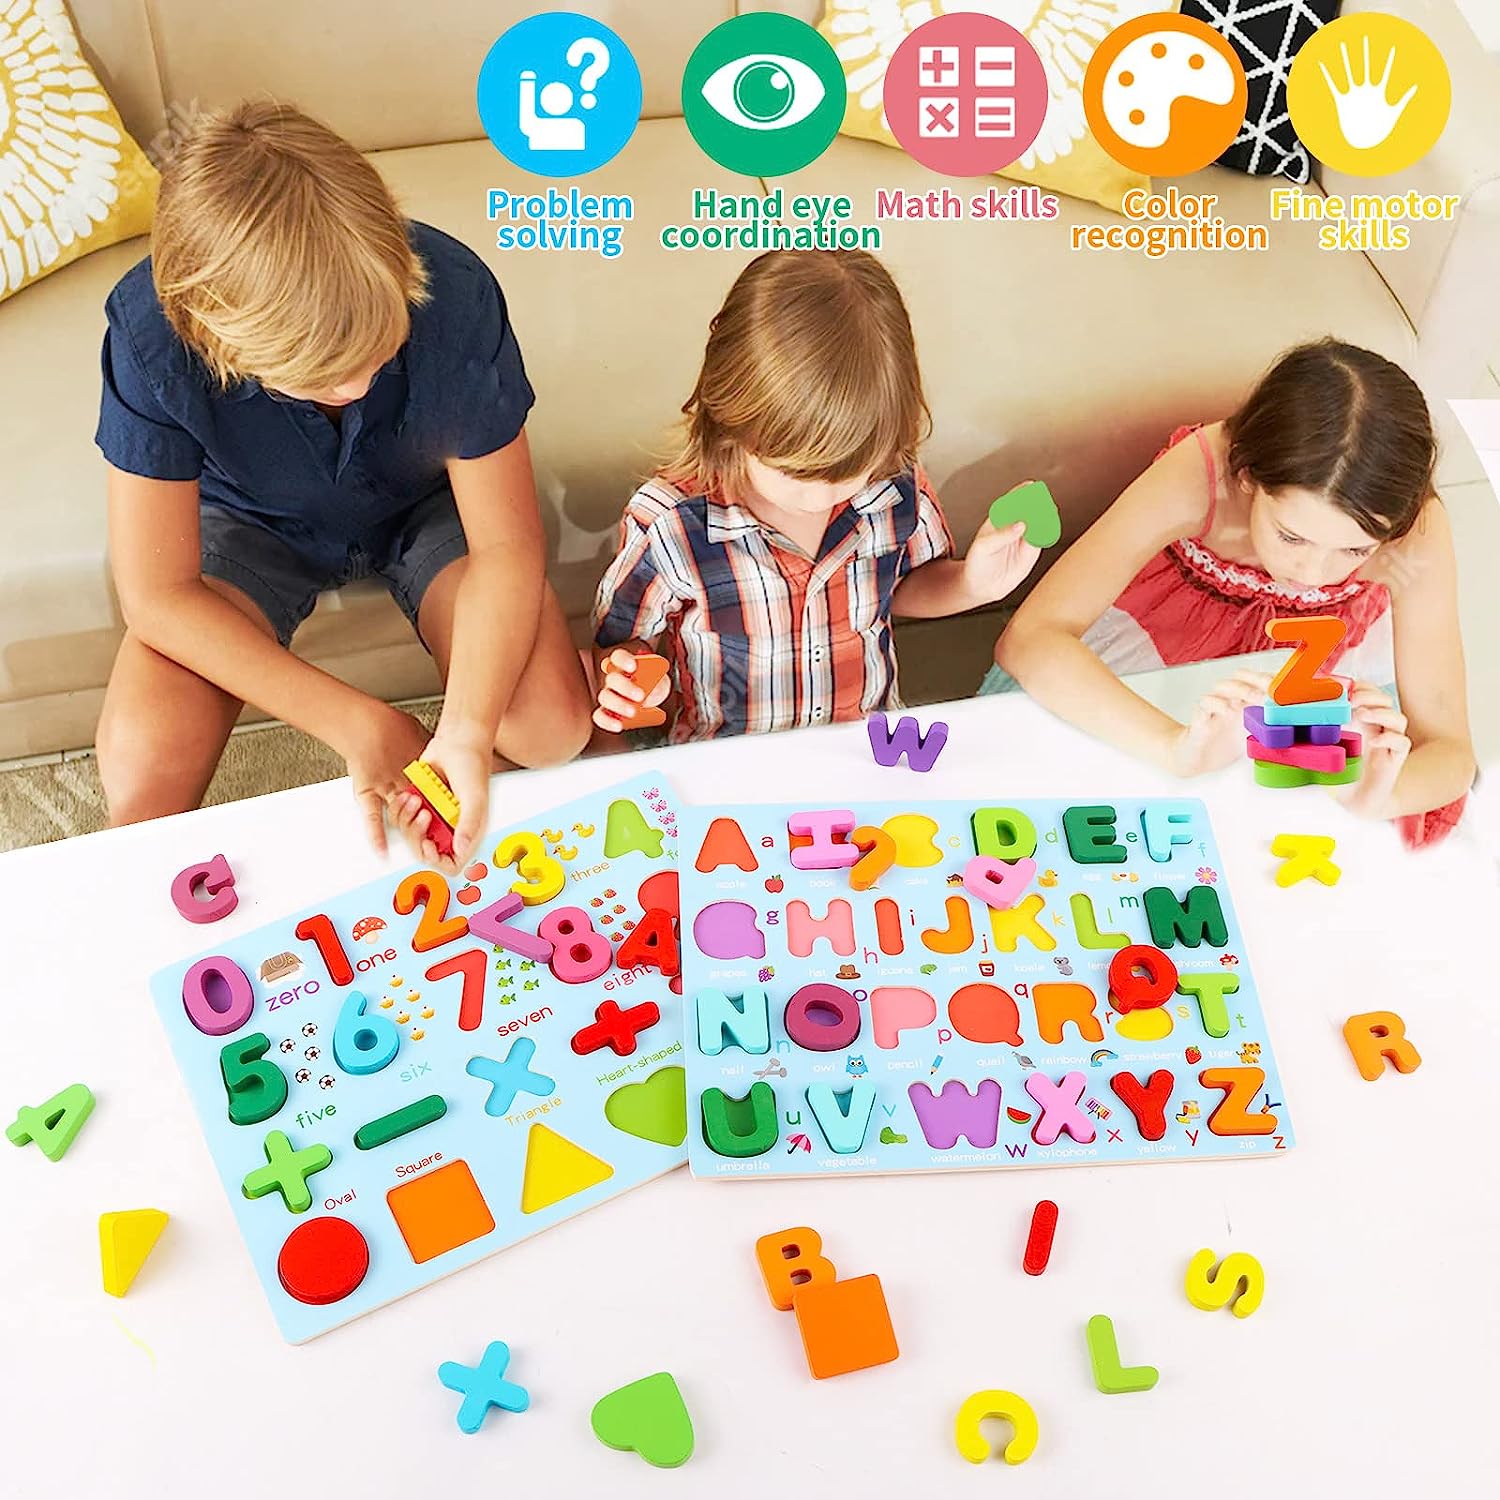 Alphabet Puzzles for Toddlers 1-3, 2 Pack Wooden Alphabet Number Shape Puzzles Toddler Learning Puzzle Toys for Kids Boys Girls 1 2 3 4 5, Preschool Educational Toys Gift